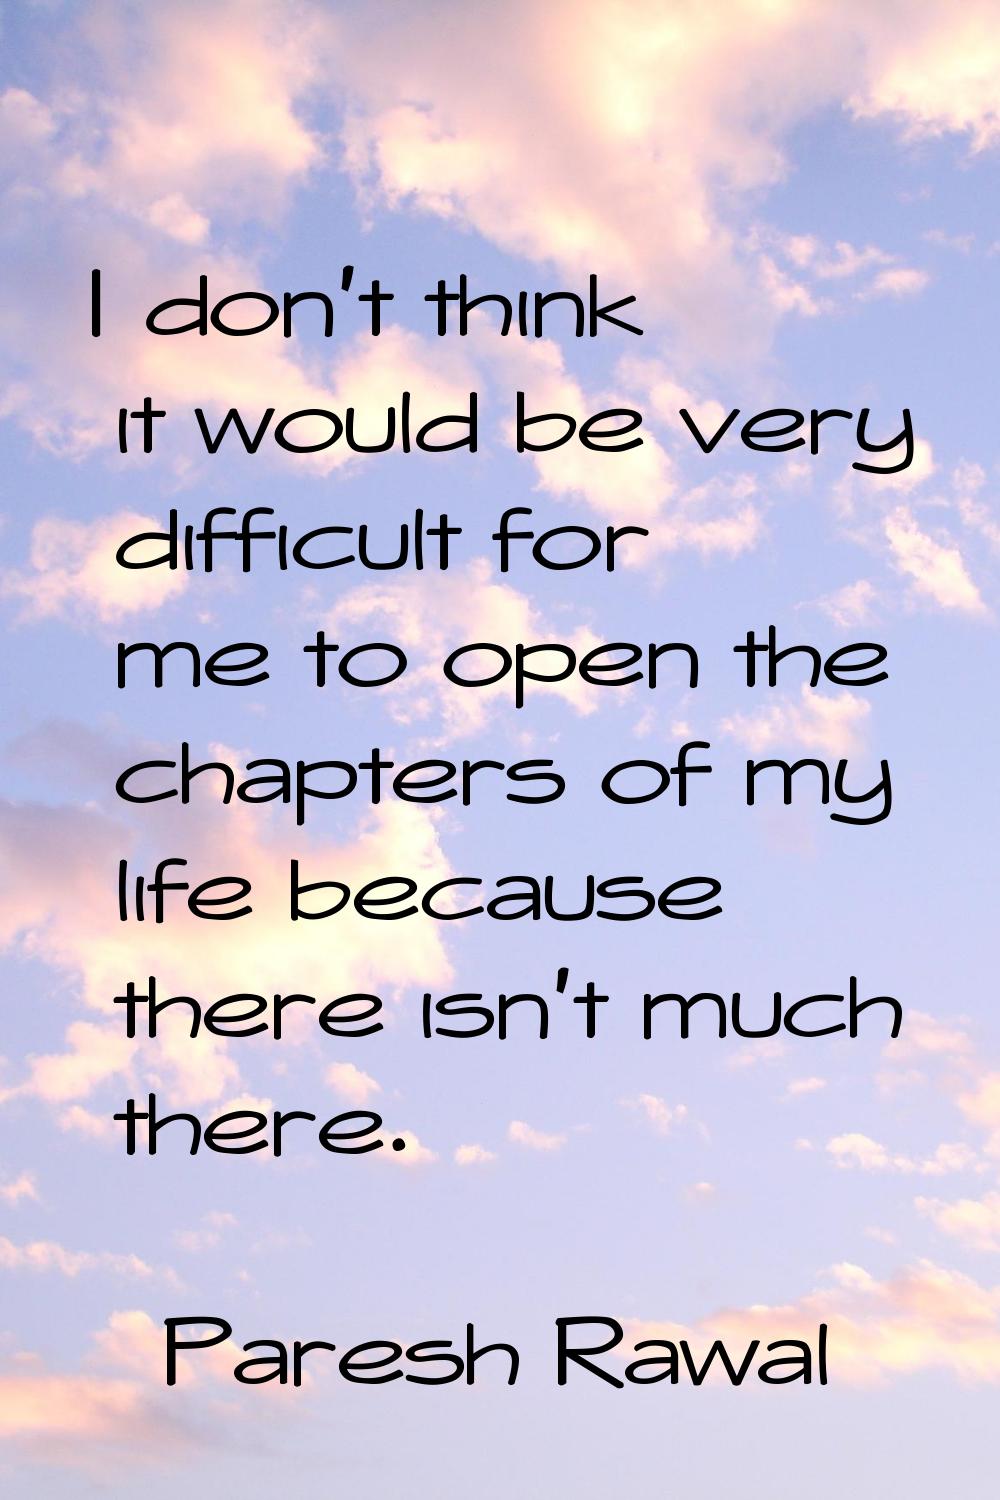 I don't think it would be very difficult for me to open the chapters of my life because there isn't